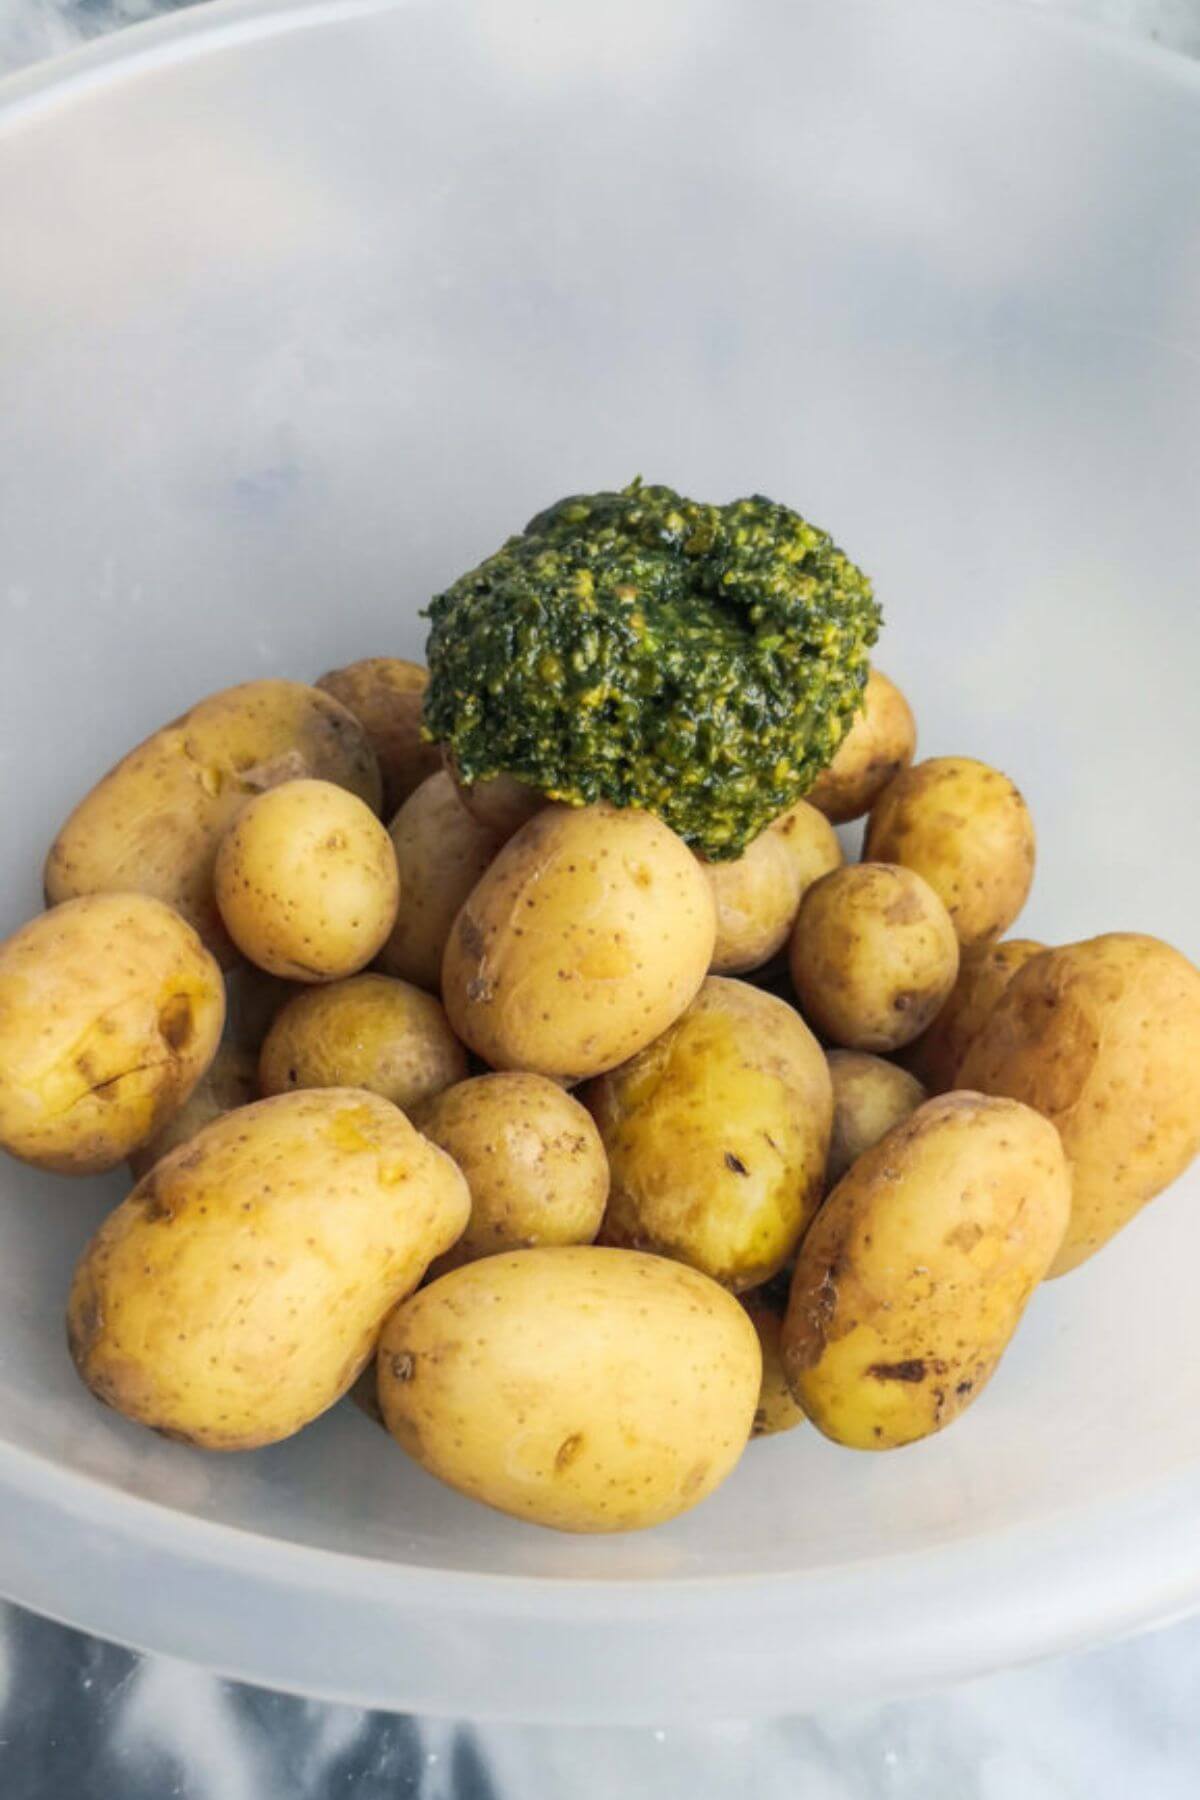 Pesto added to a large clear mixing bowl with potatoes in it.